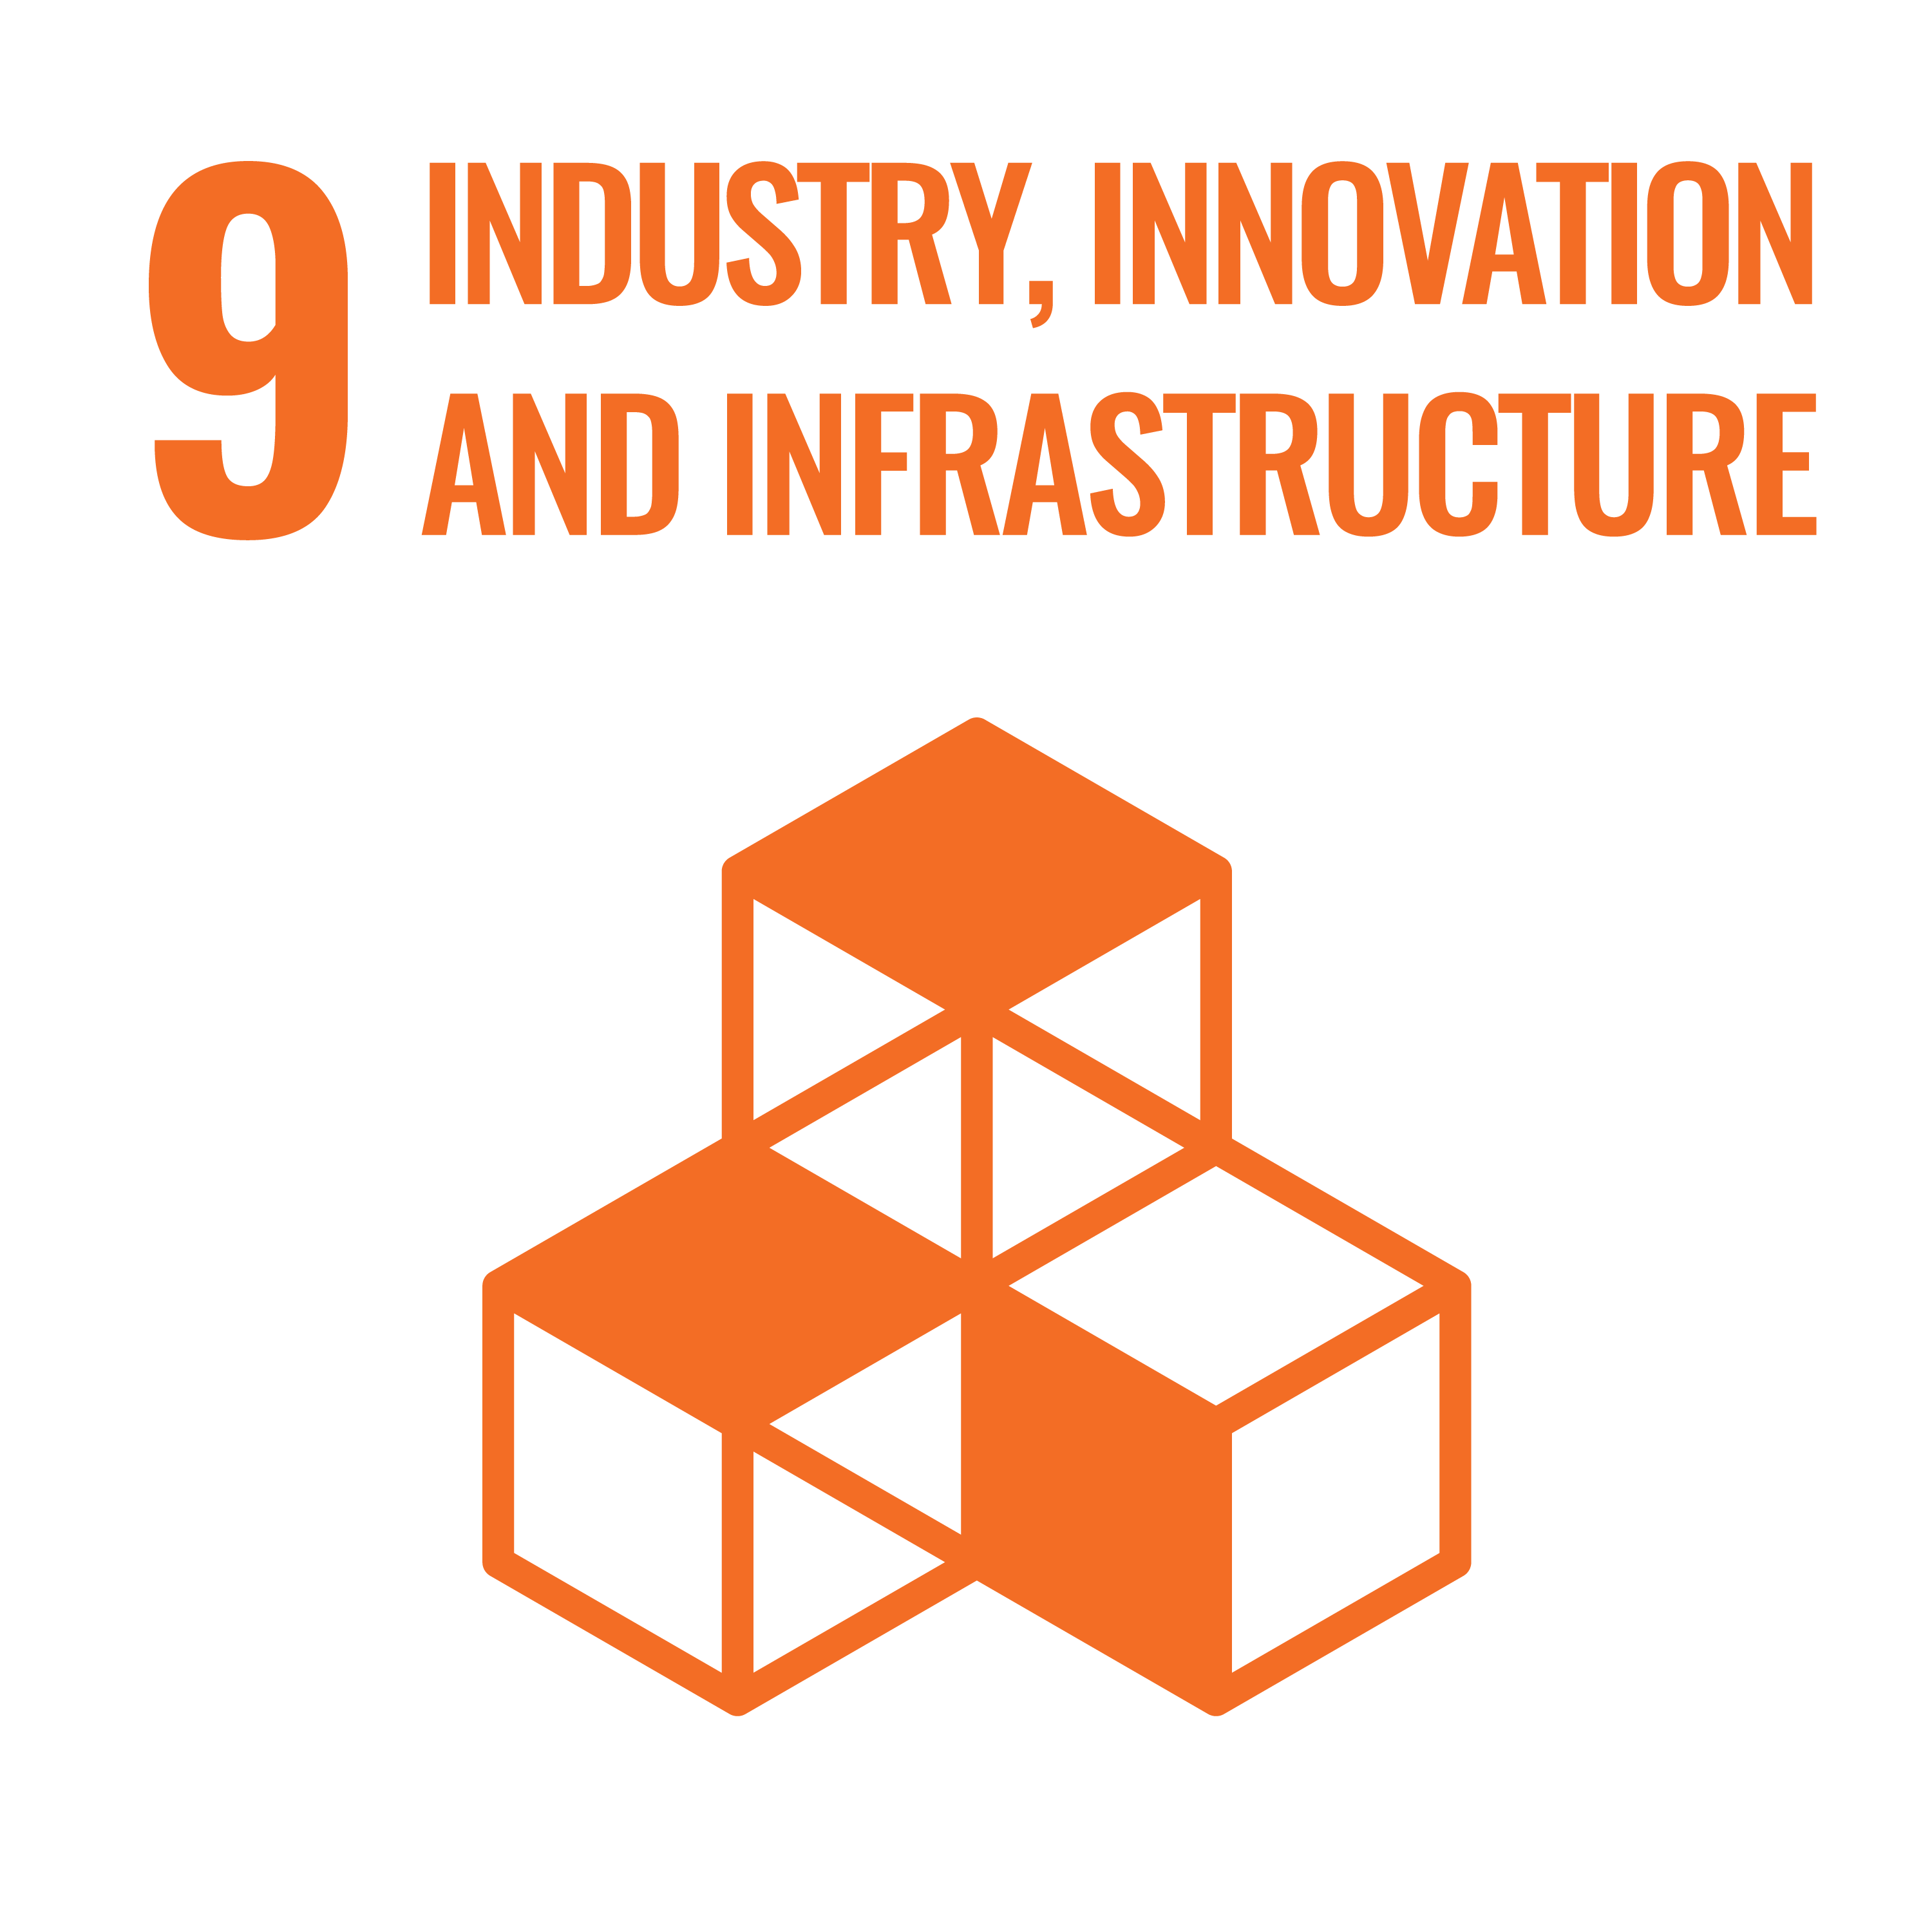 SDG 9: Industry, Innovation, and Infrastructure